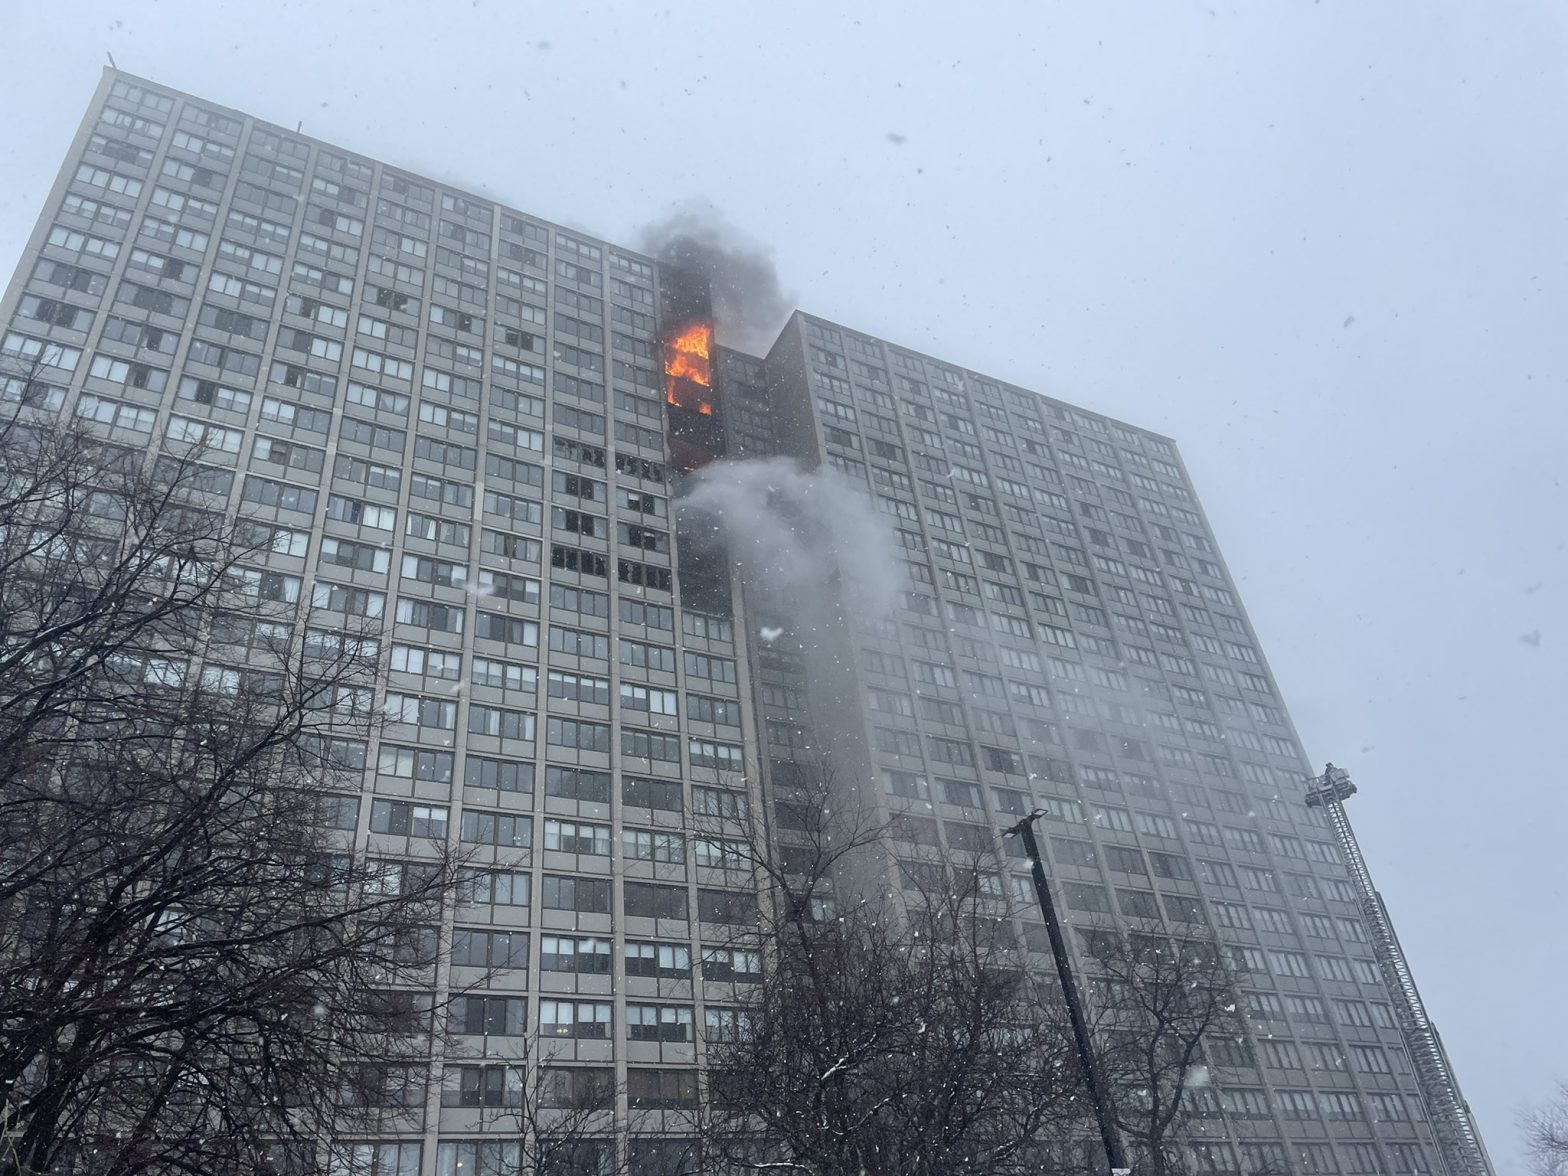 Kenwood, Chicago high-rise fire: At least 1 dead, multiple injured in 4850 lake park fire, confirms commissioner Annette Nance-Holt